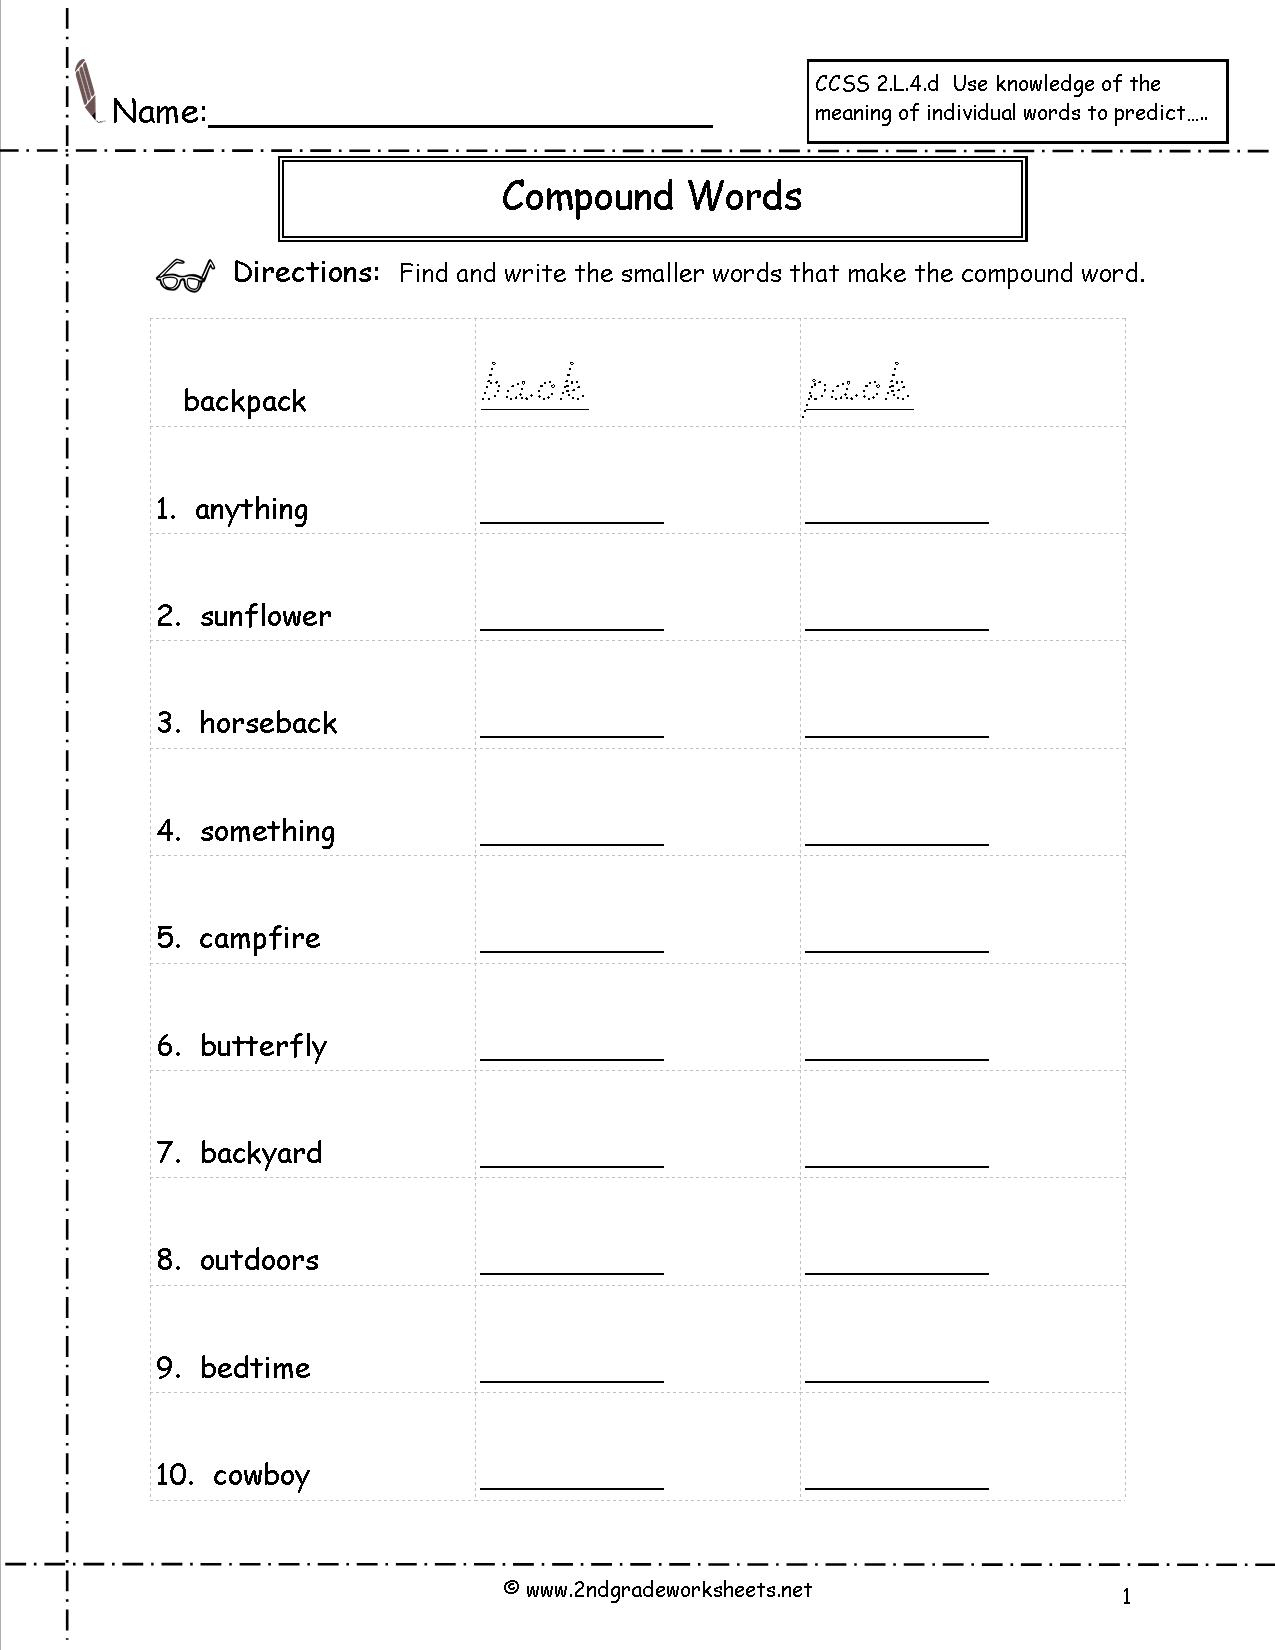 Free Printable Second Grade Worksheets » High School Worksheets - Free Printable Second Grade Worksheets